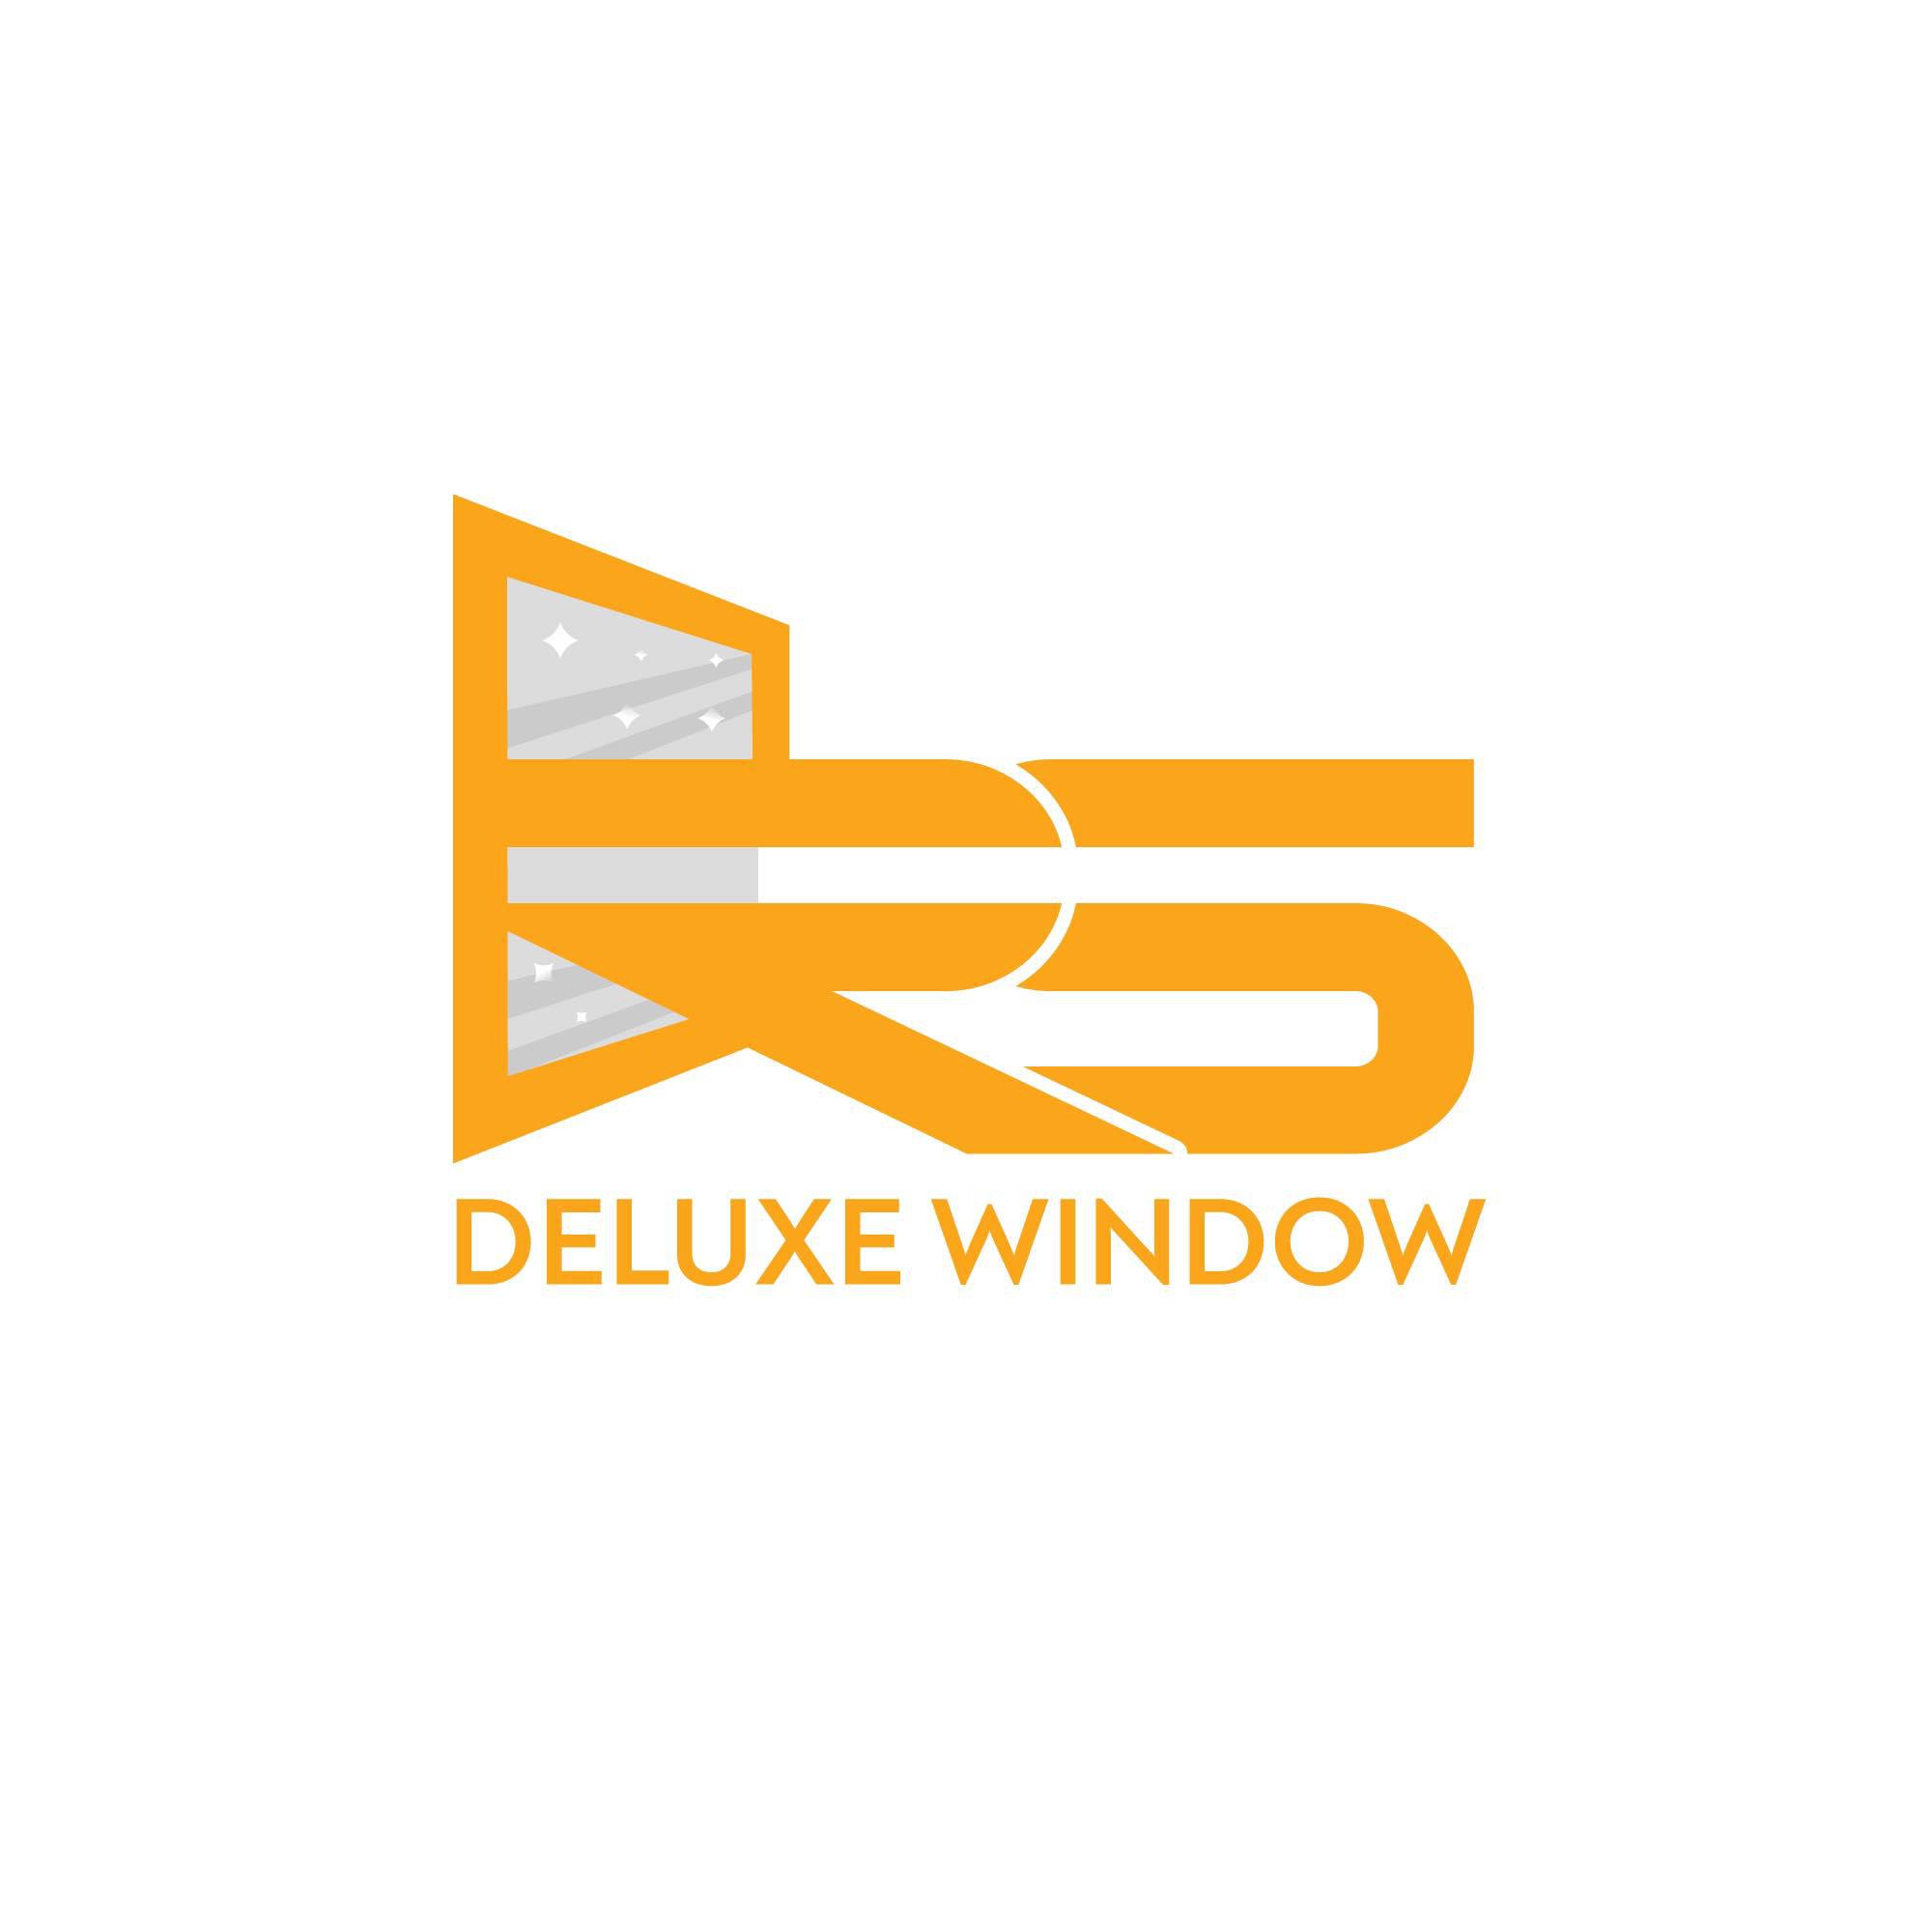 Images RS Deluxe Windows Ltd